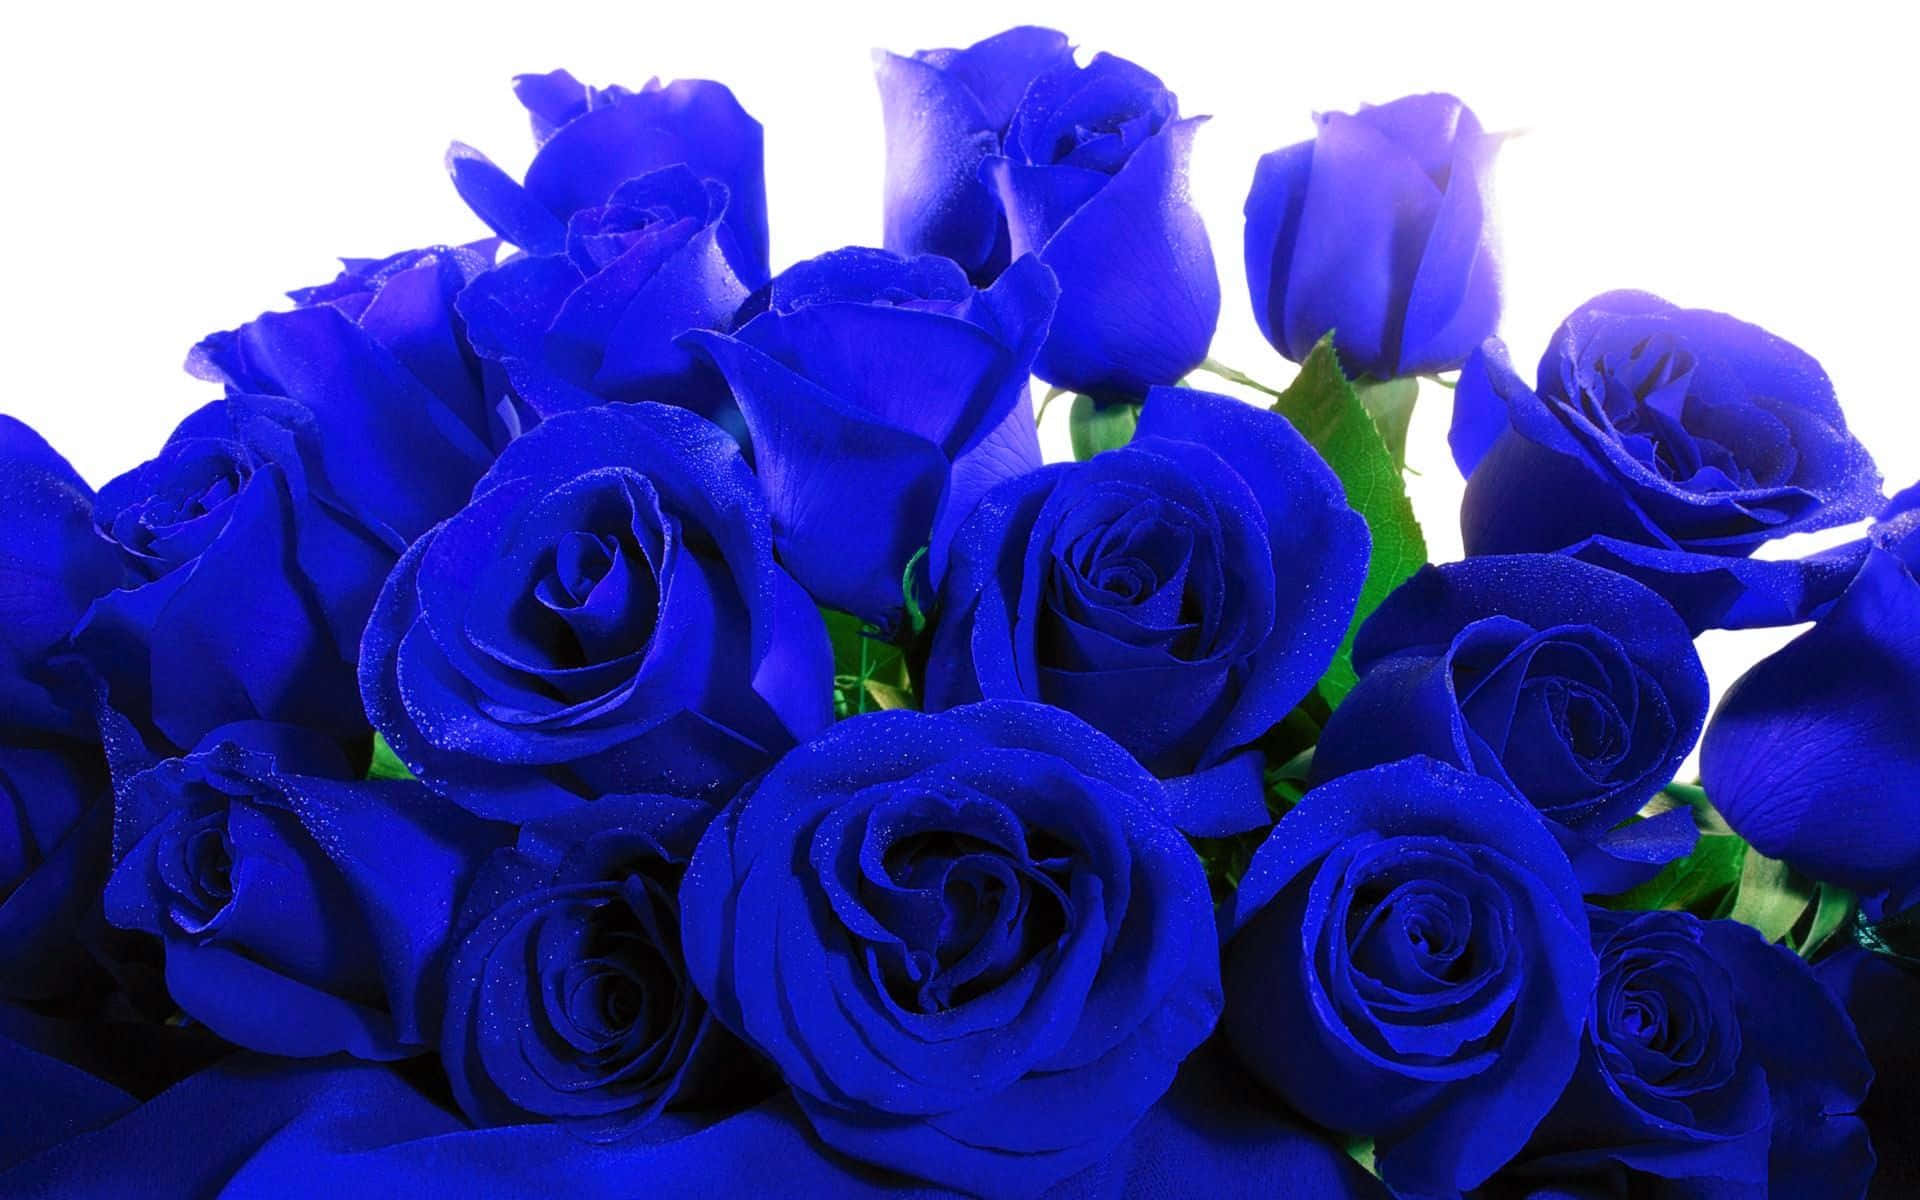 A gorgeous blue rose standing vibrant in front of a blurred background. Wallpaper